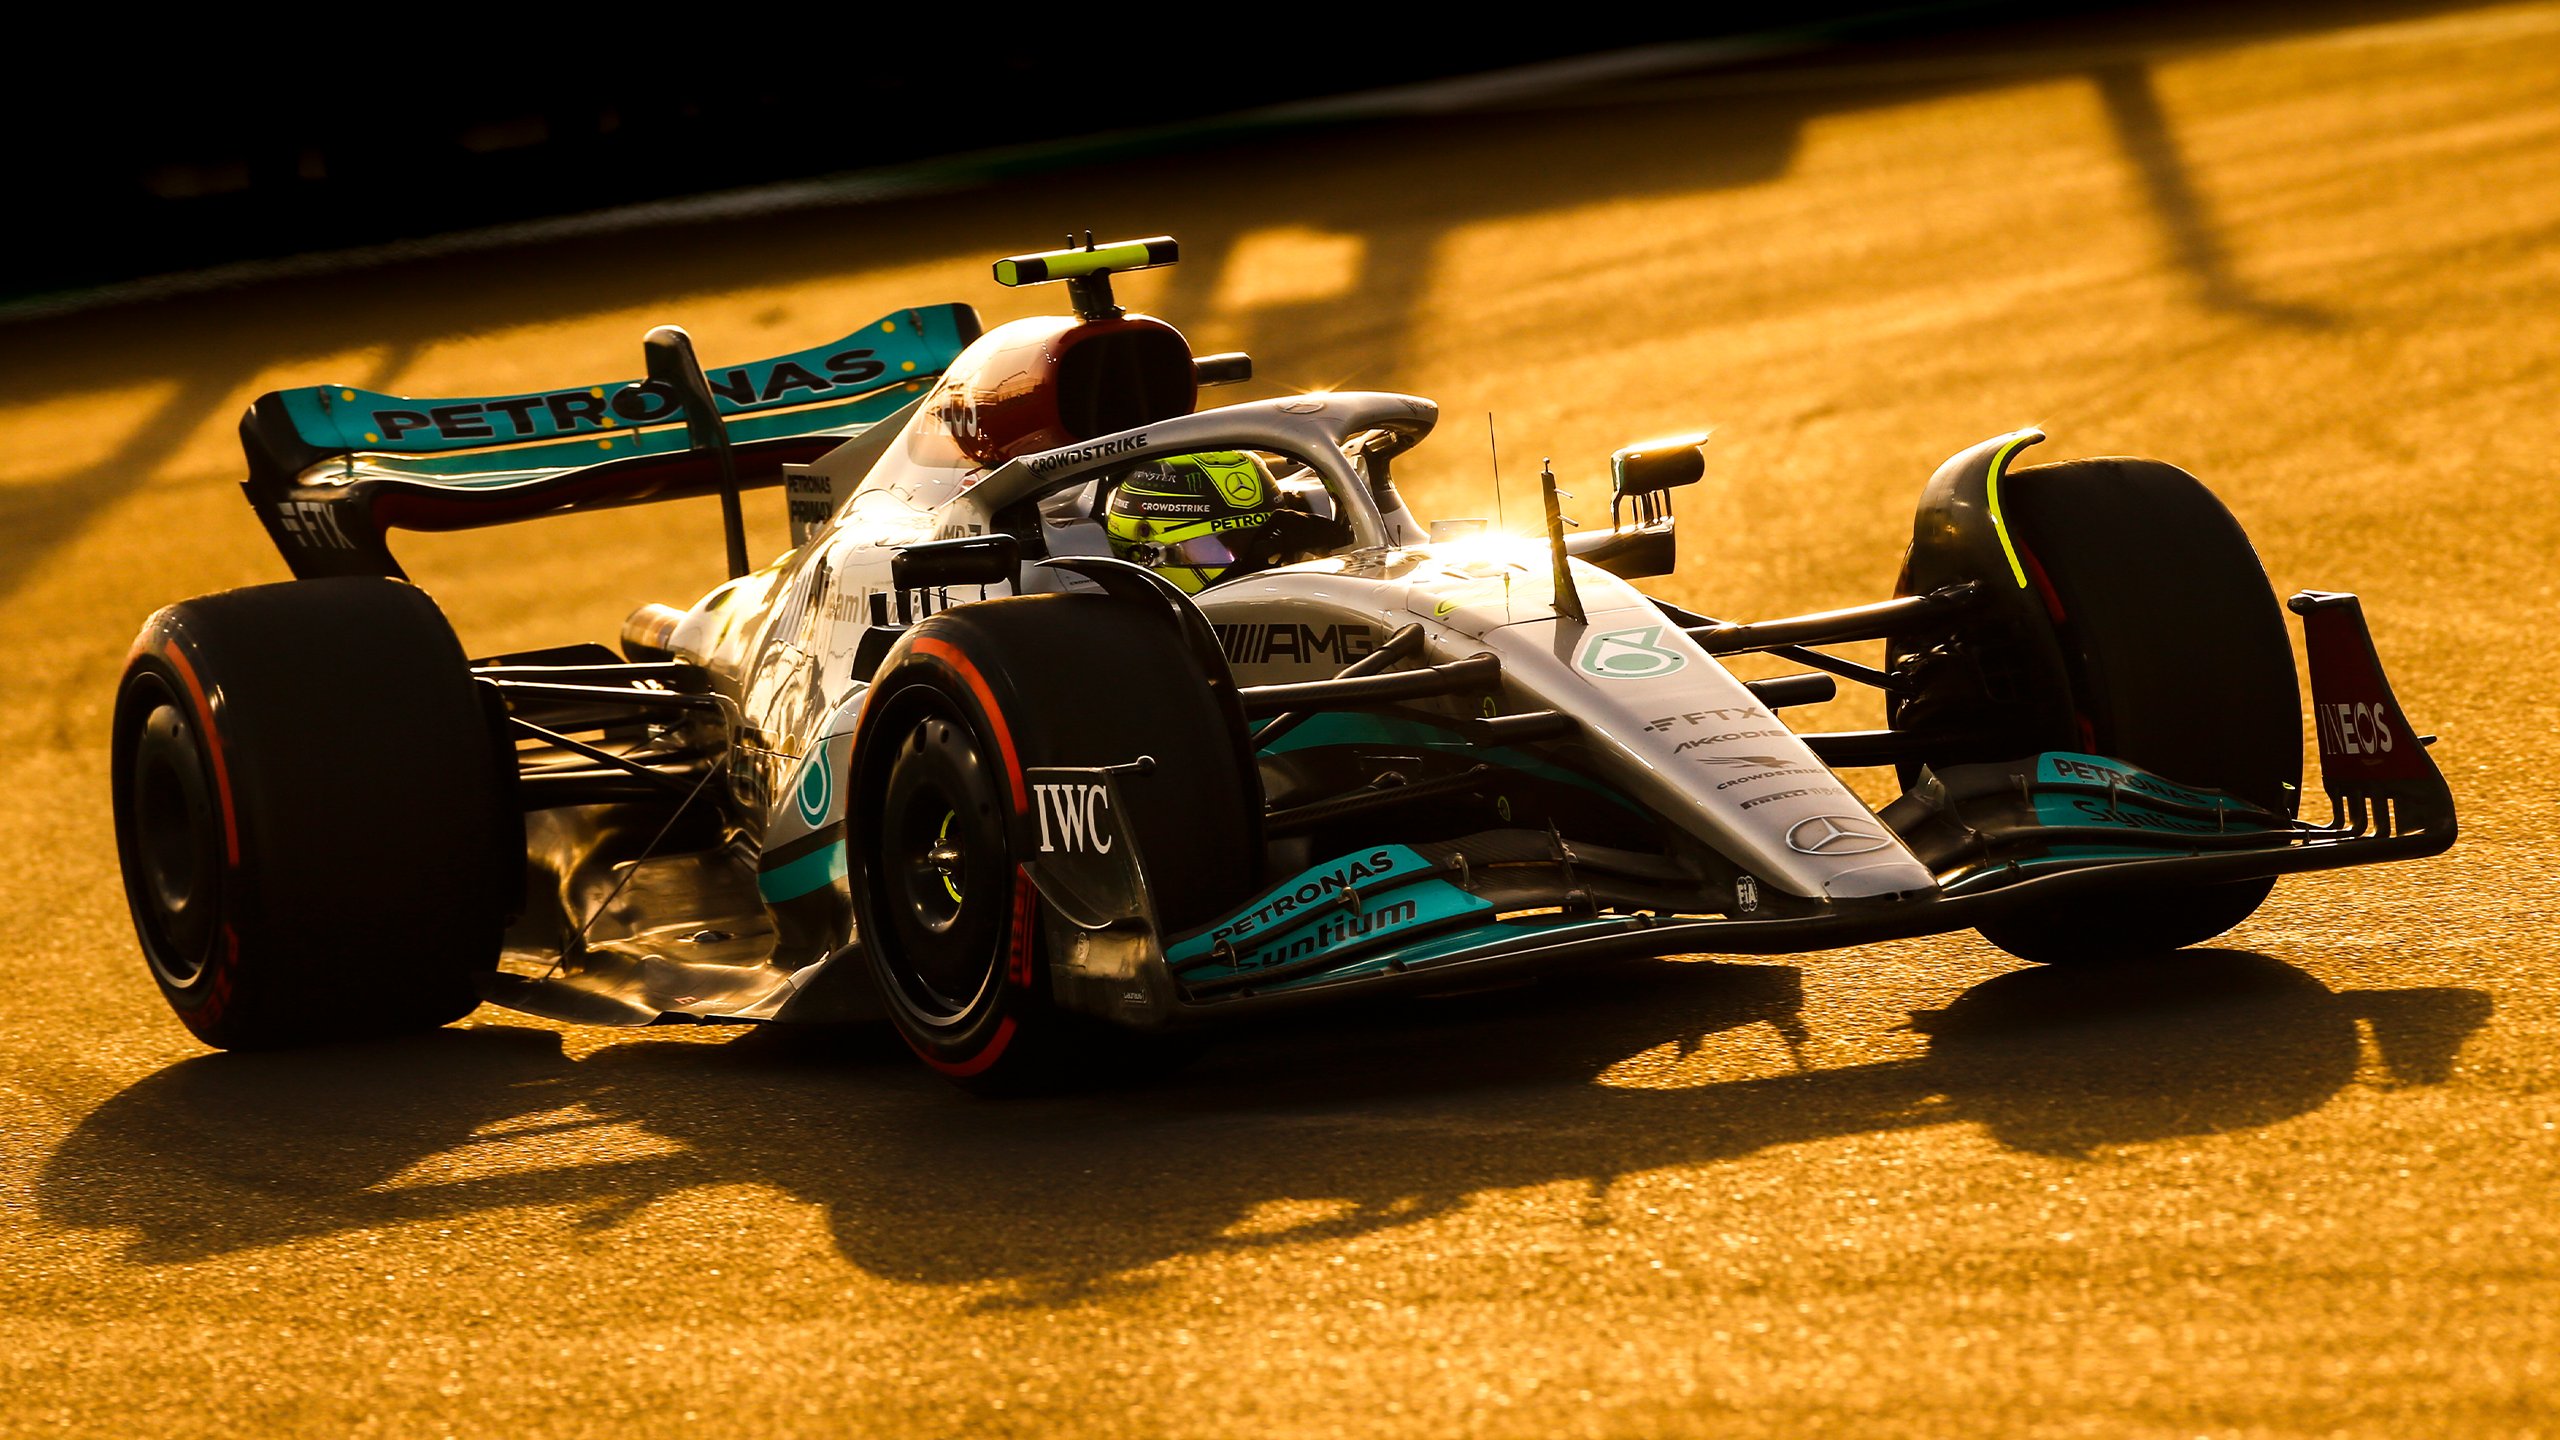 Mercedes AMG PETRONAS F1 Team Last But Not Least, A Few Extra Mobile Background. Have Any Of Our #SaudiArabianGP Snaps Made It As Your New Wallpaper?